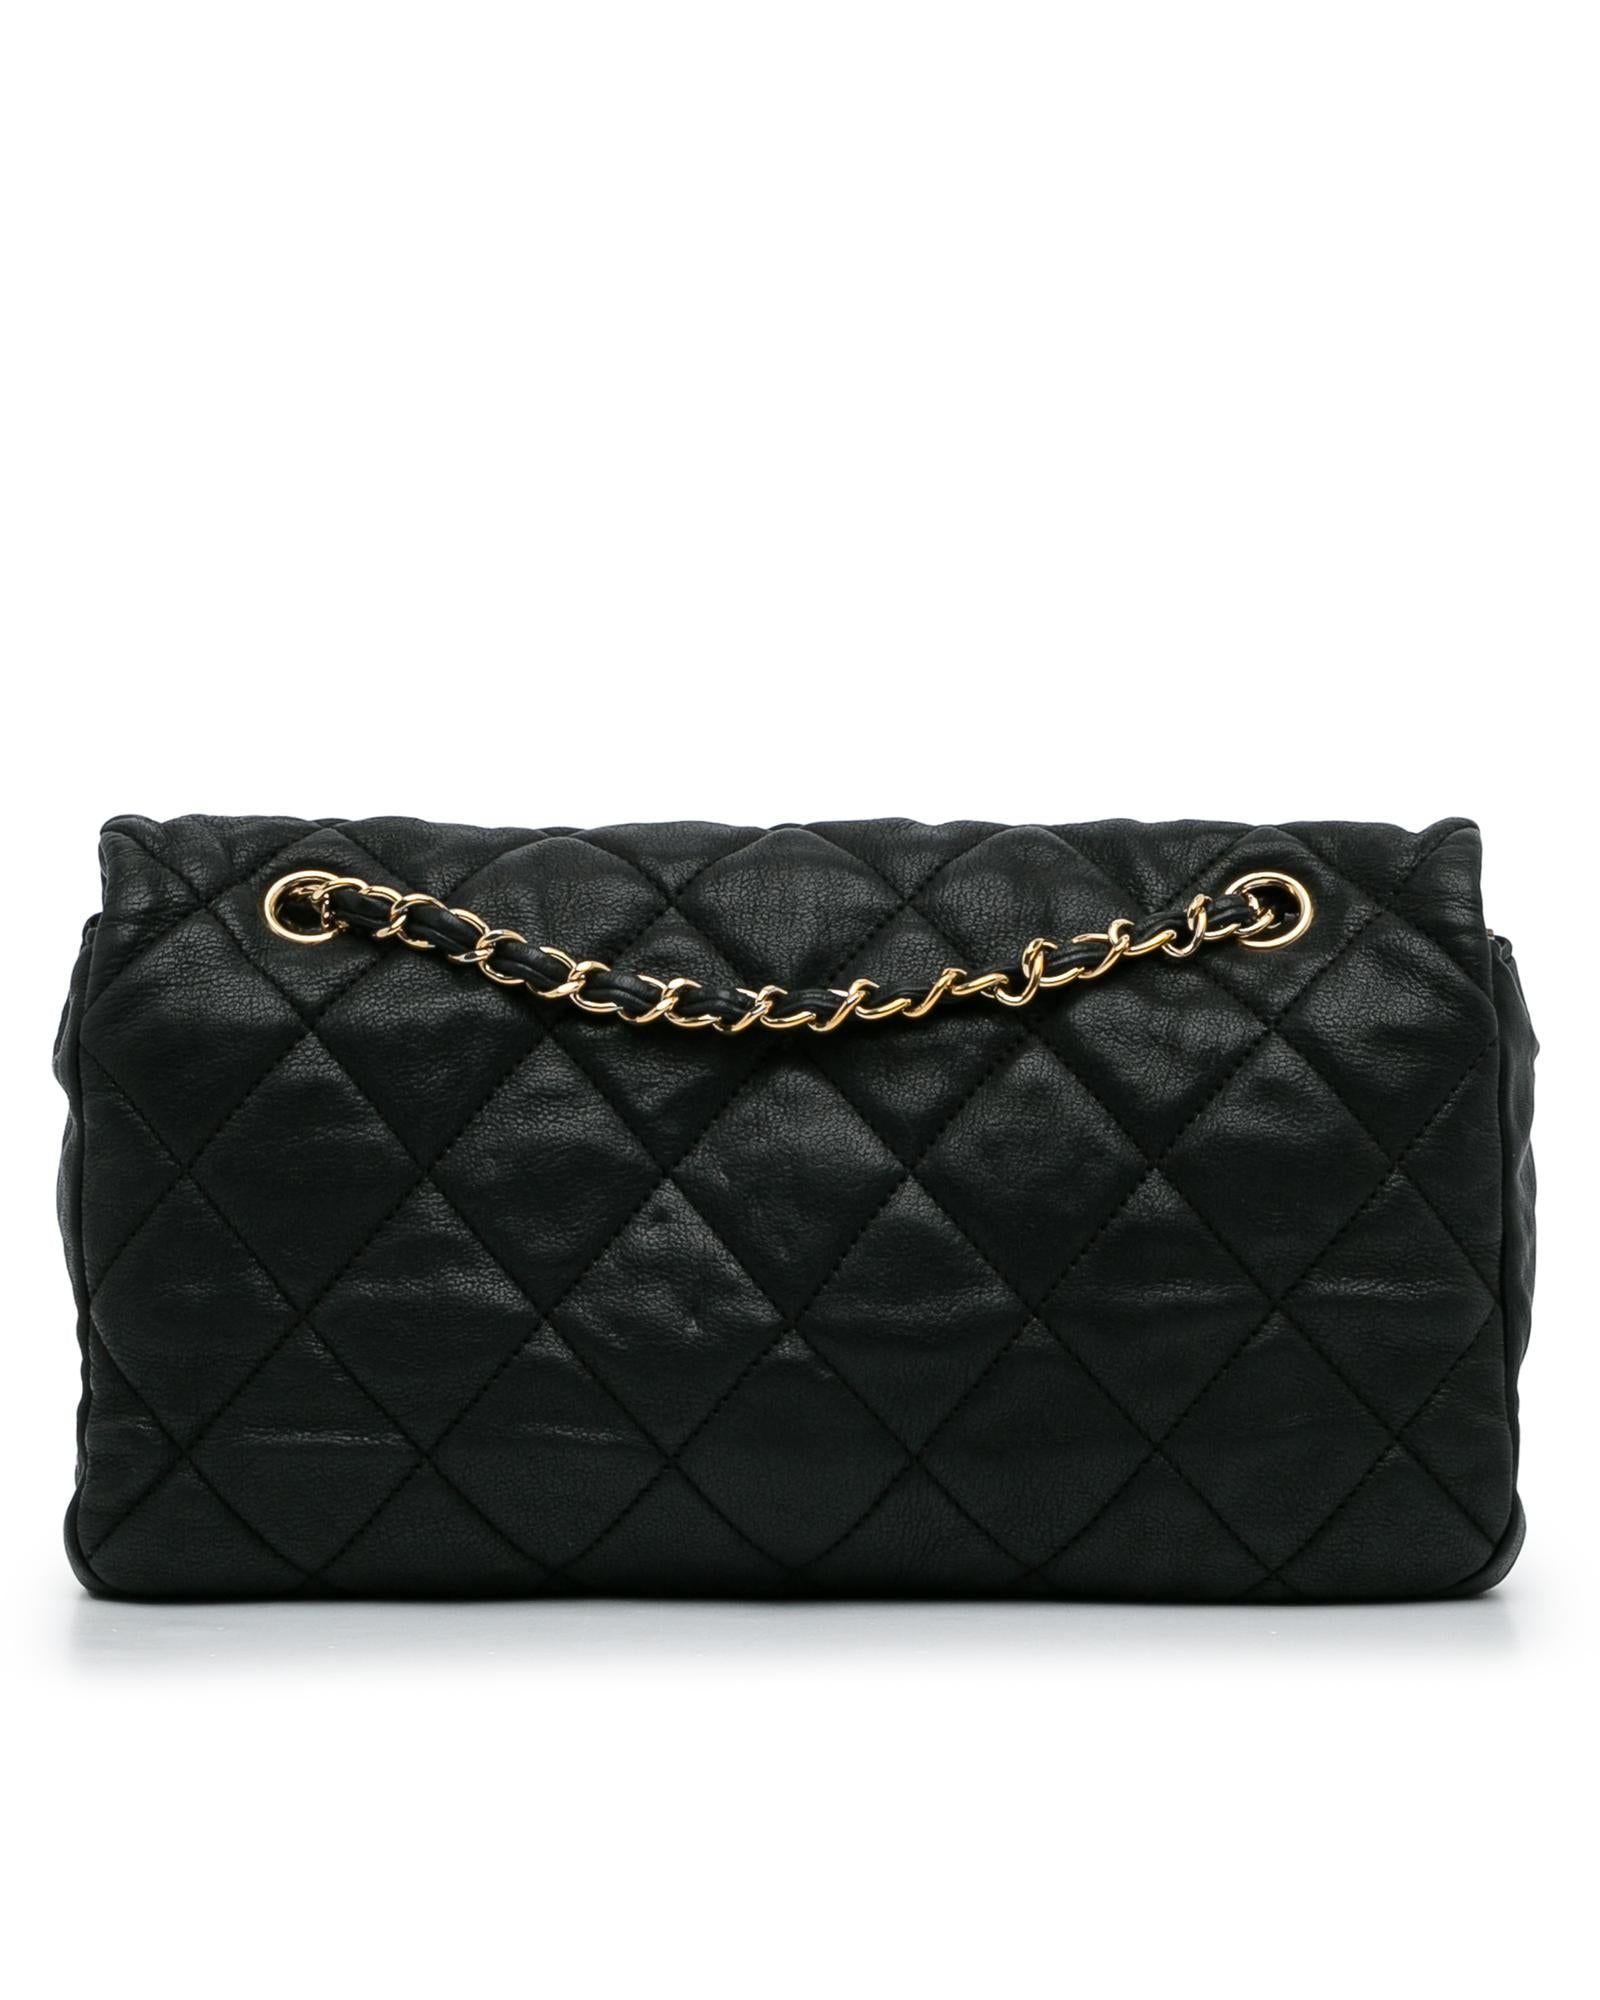 Chanel Quilted Lambskin Shoulder Bag With Chain Straps in Black